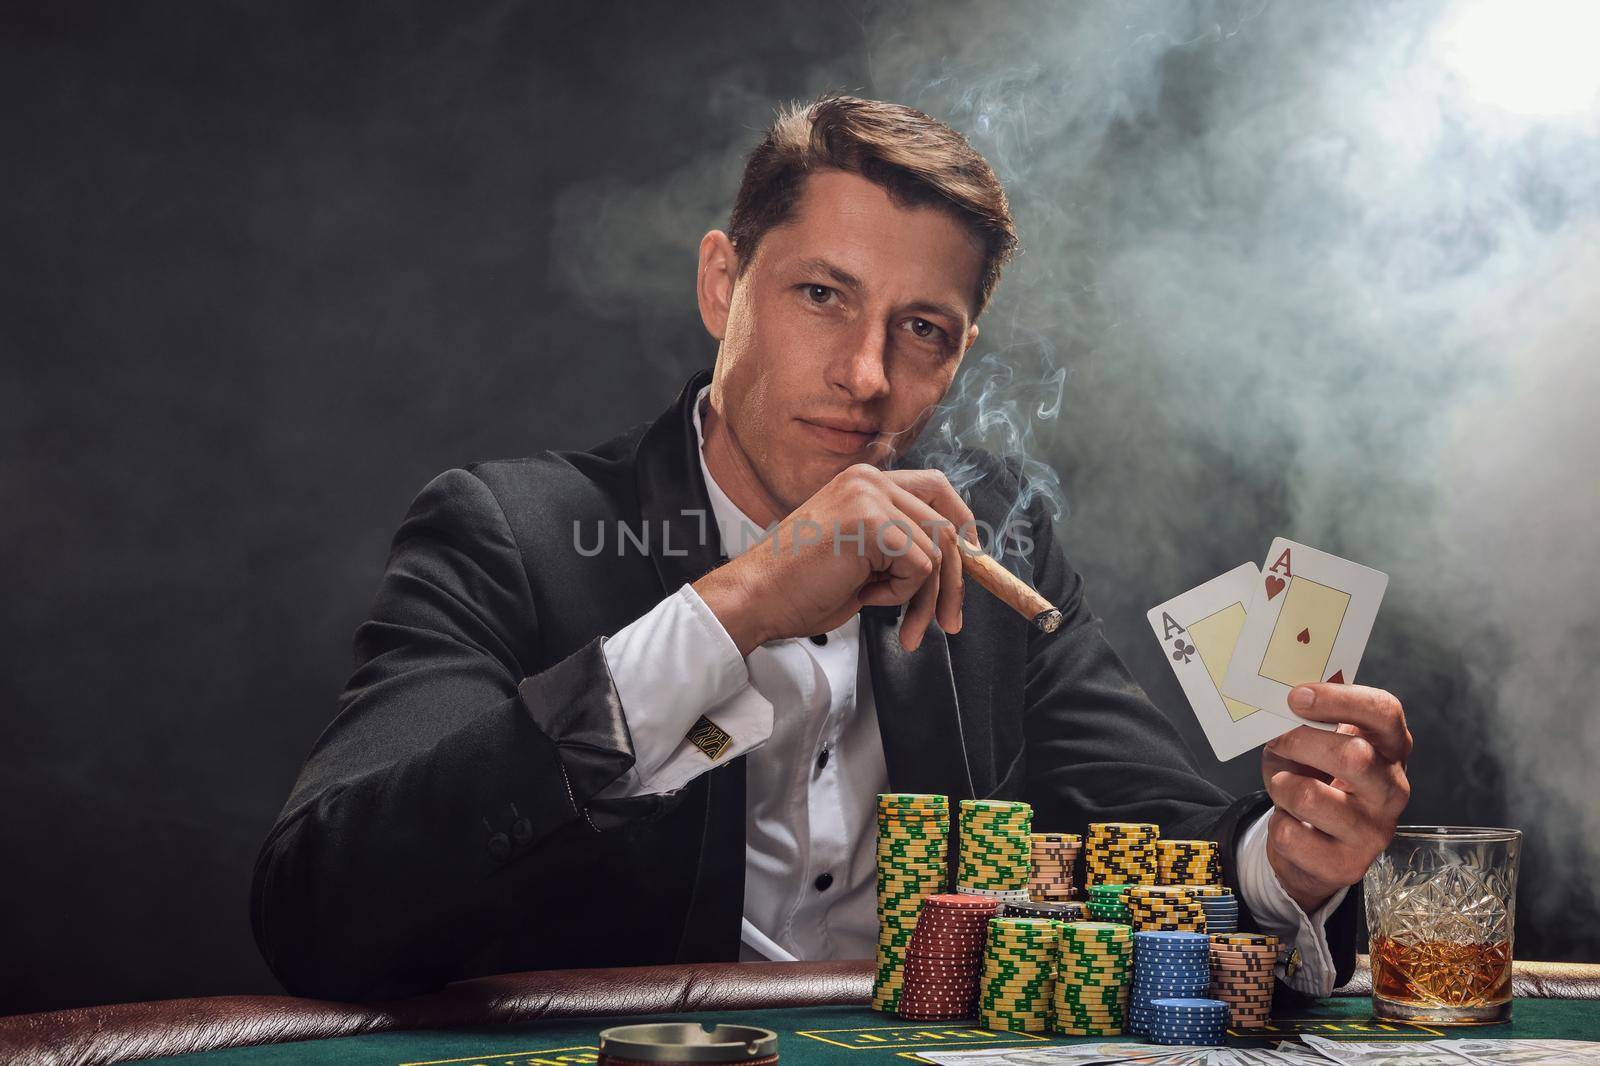 Elegant person in a black slassic suit and white shirt is playing poker sitting at the table at casino in smoke, against a white spotlight. He rejoicing his win showing two aces in his hand, smoking a cigar and looking at the camera. Gambling addiction. Sincere emotions and entertainment concept.